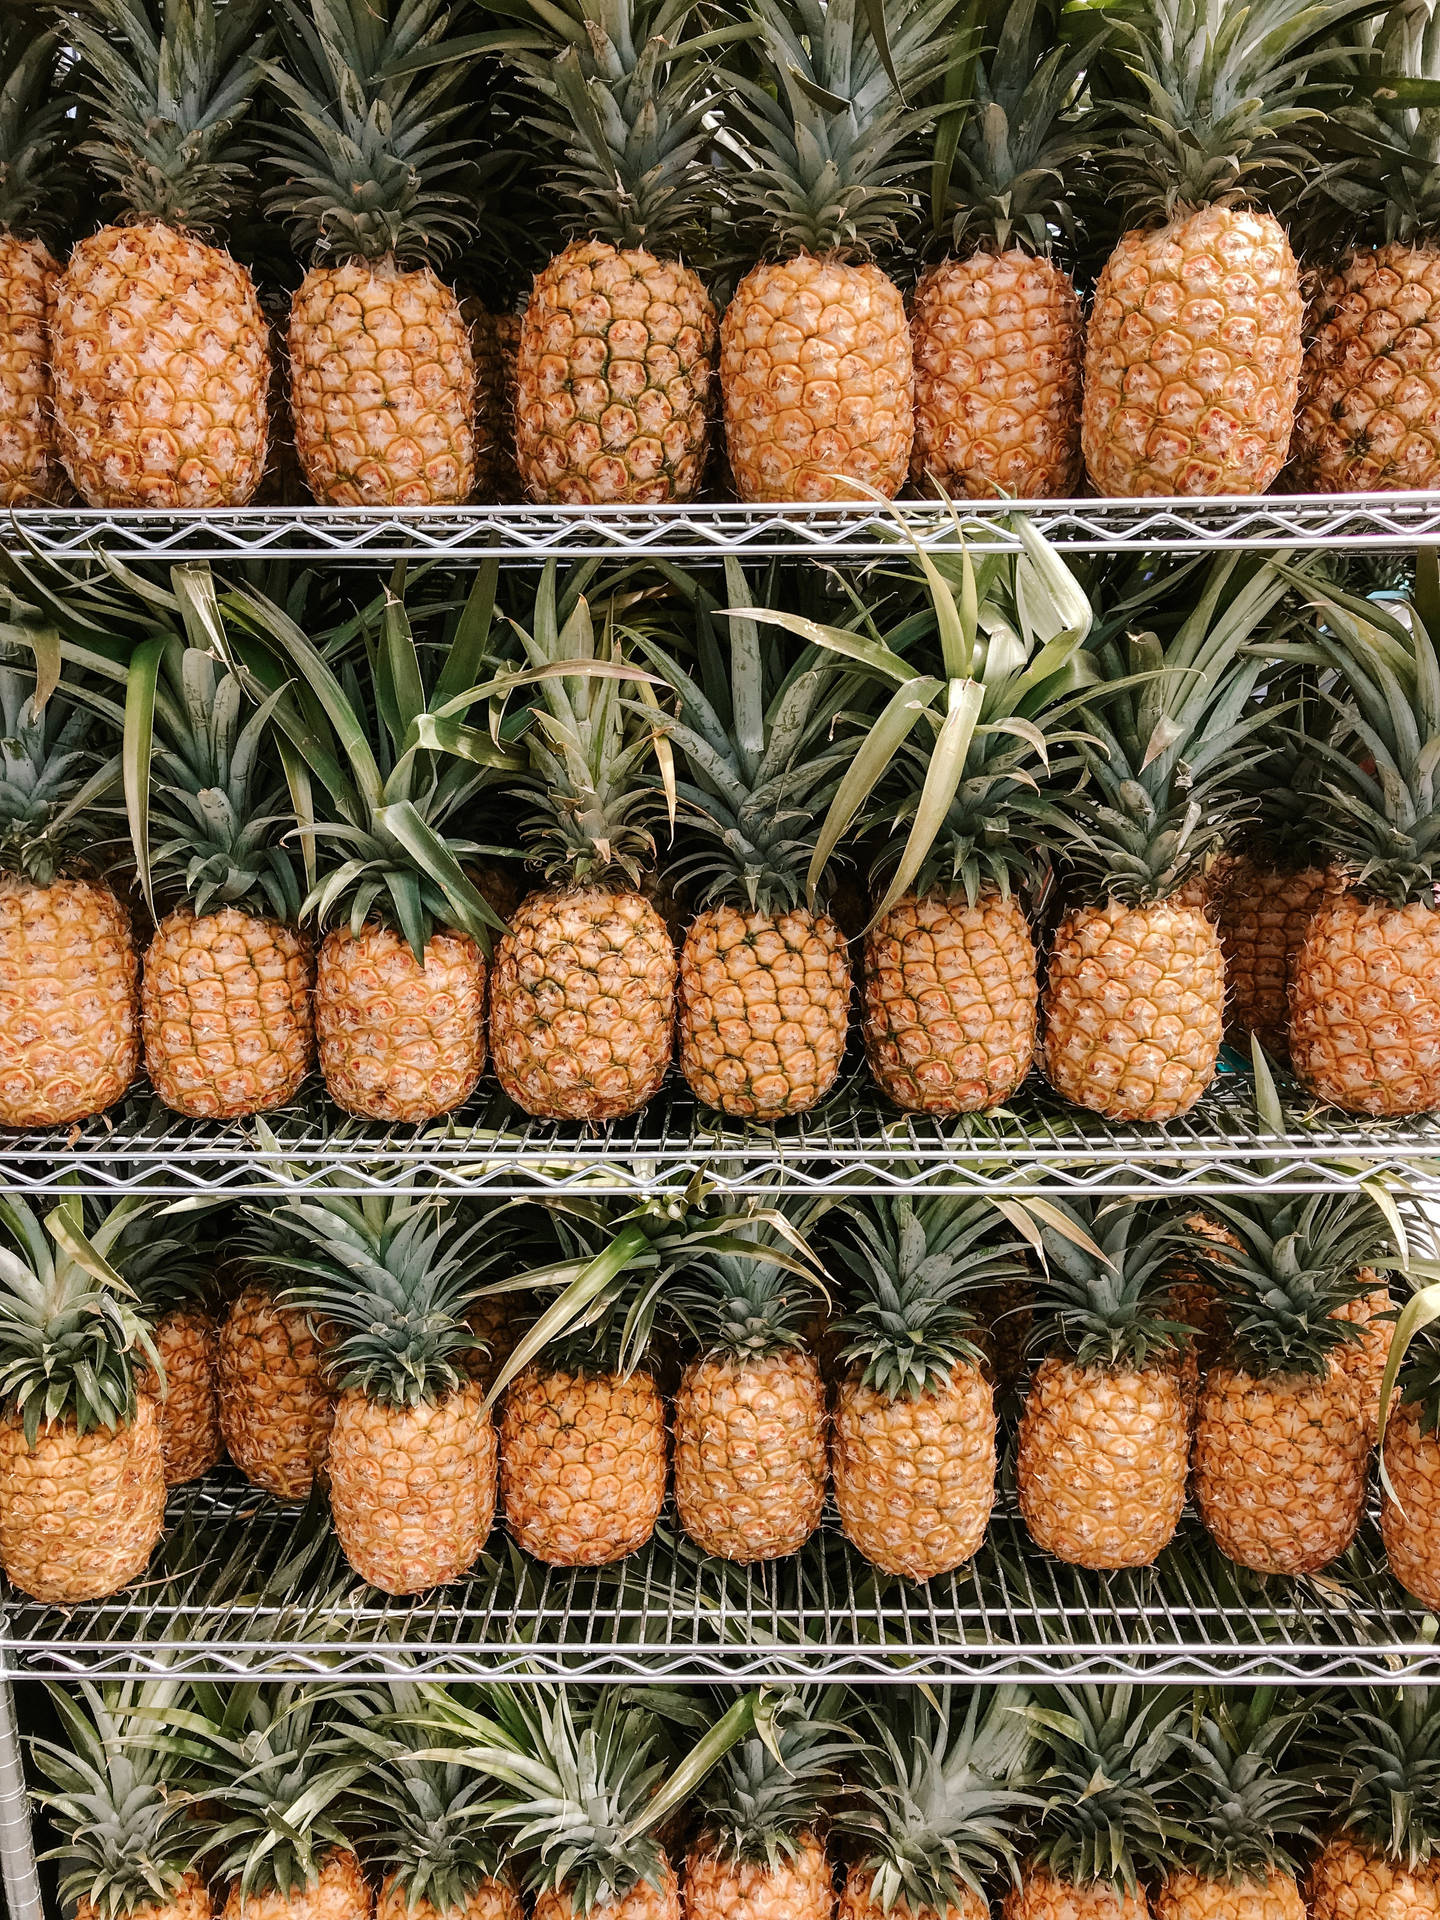 A Delicious Pineapple Ripening On A Shelf Background